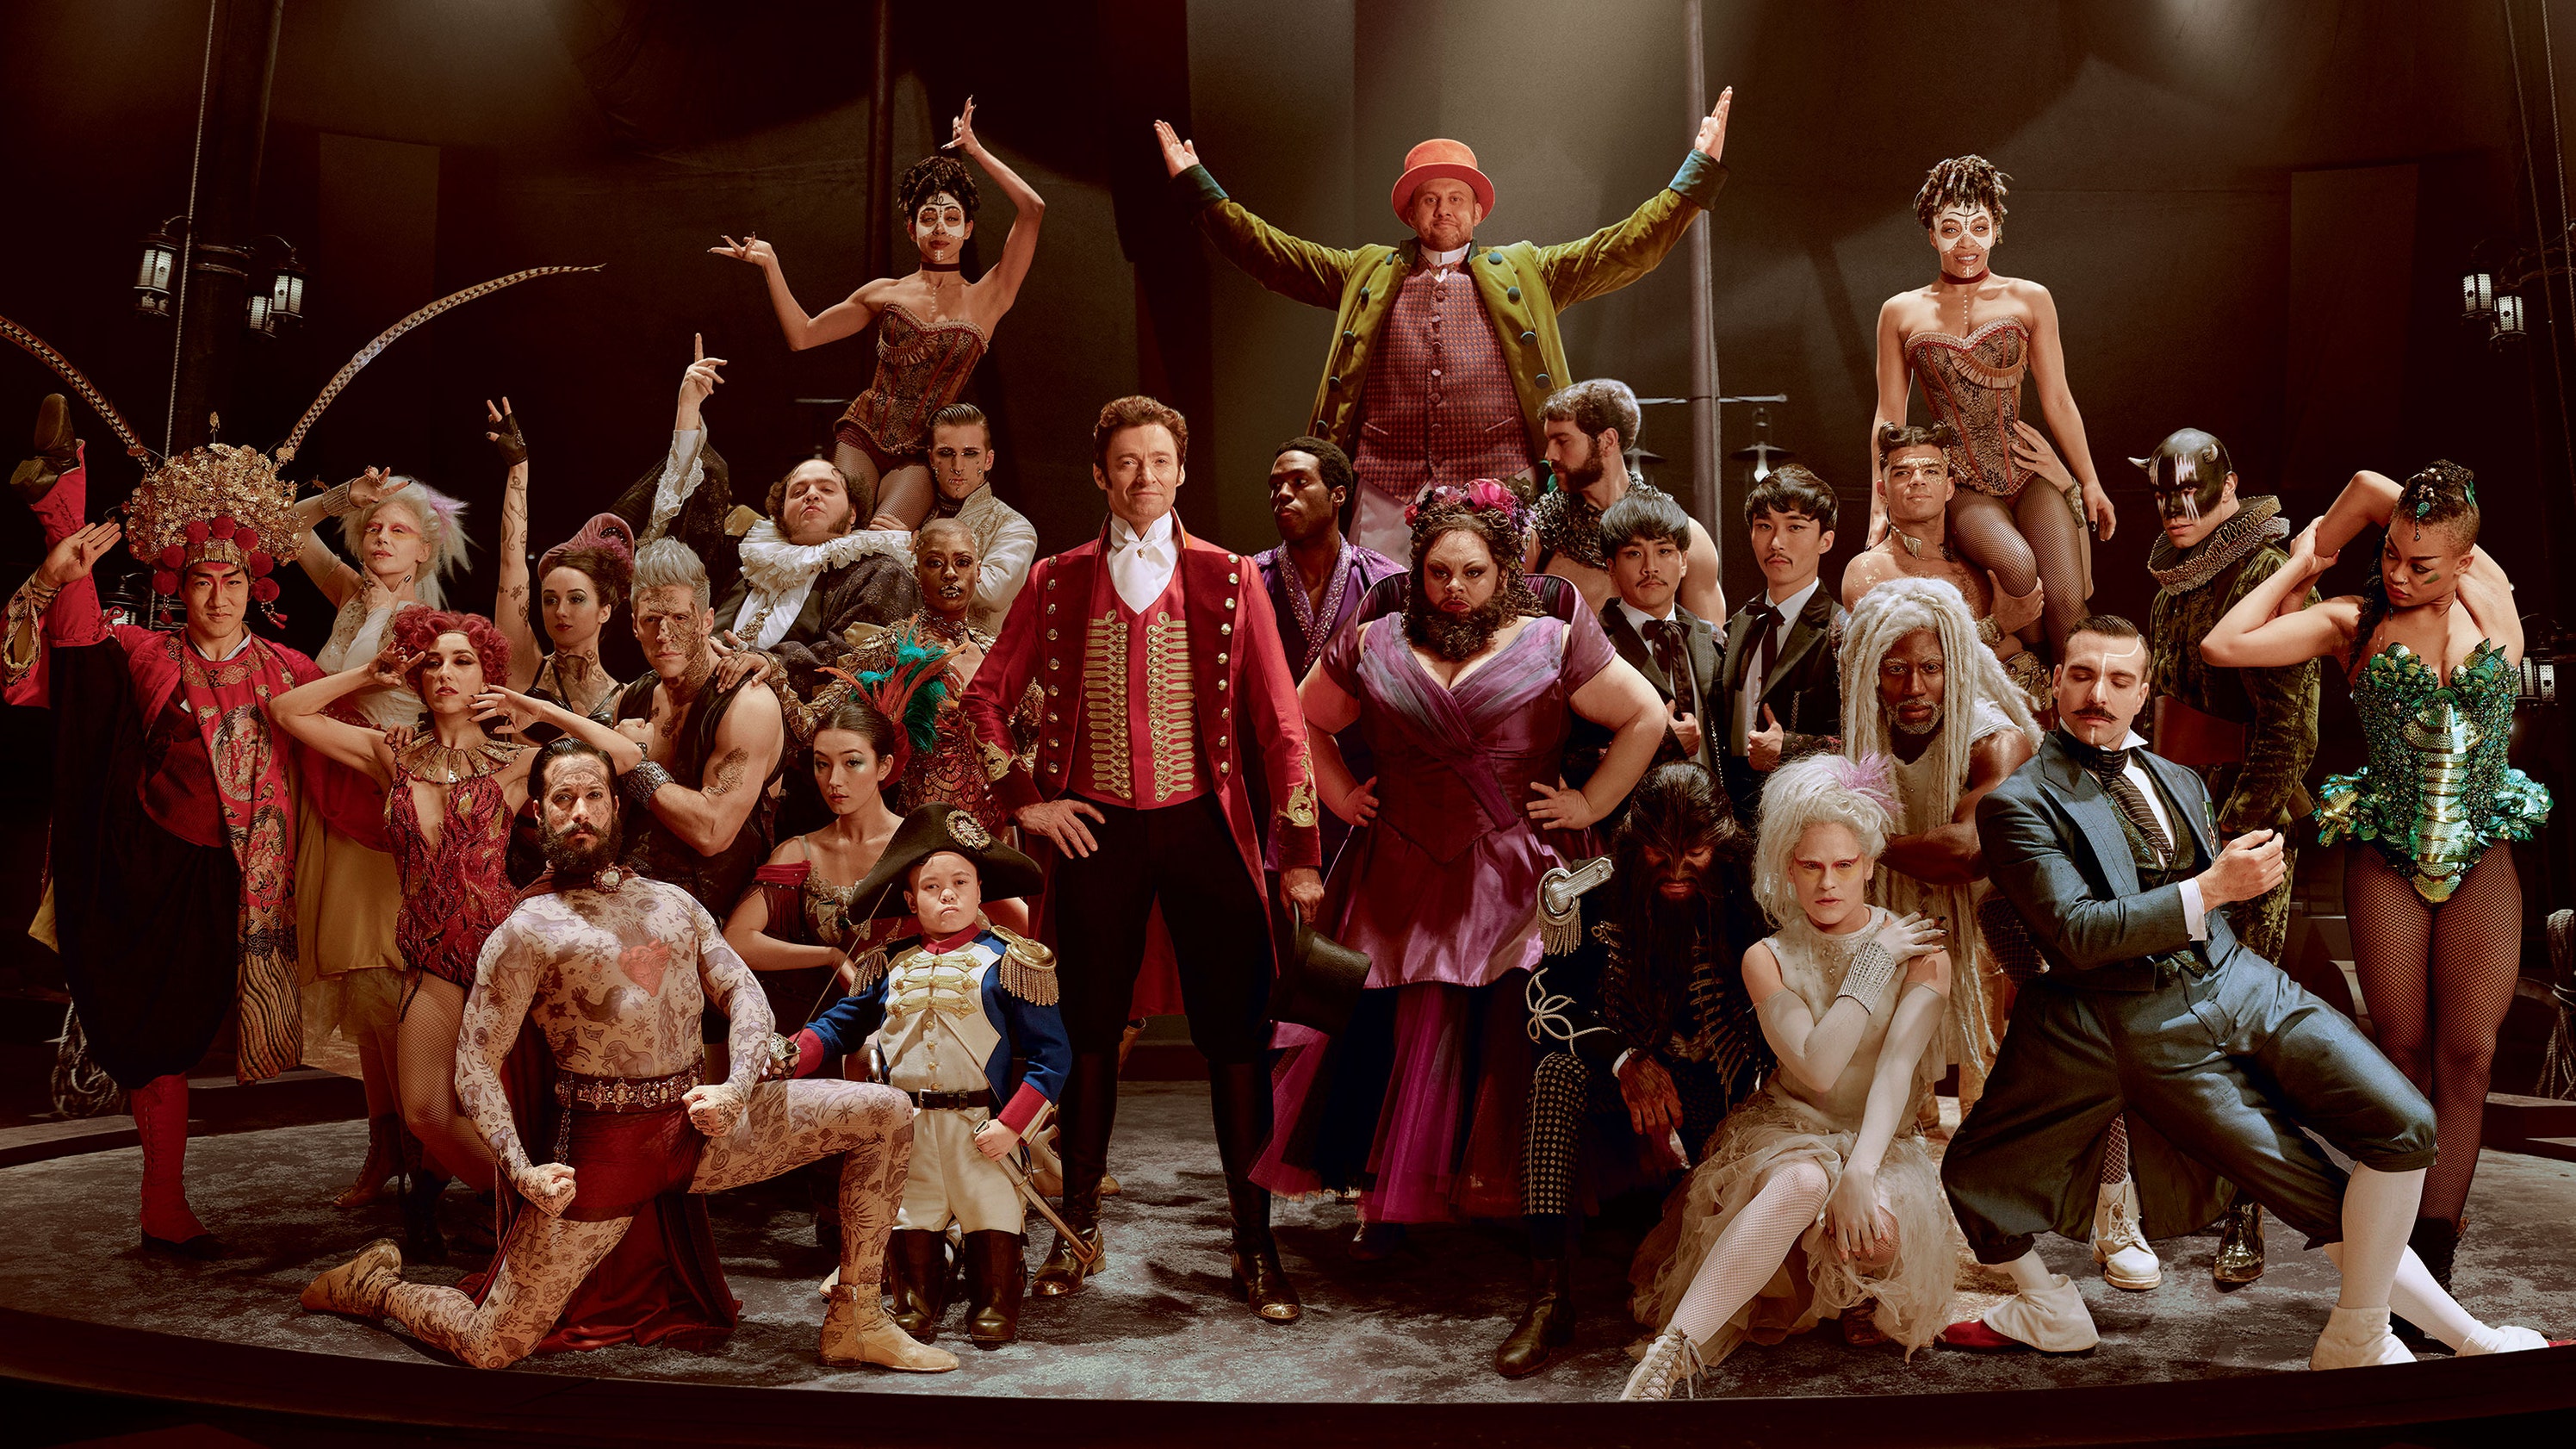 What I learnt from The Greatest Showman